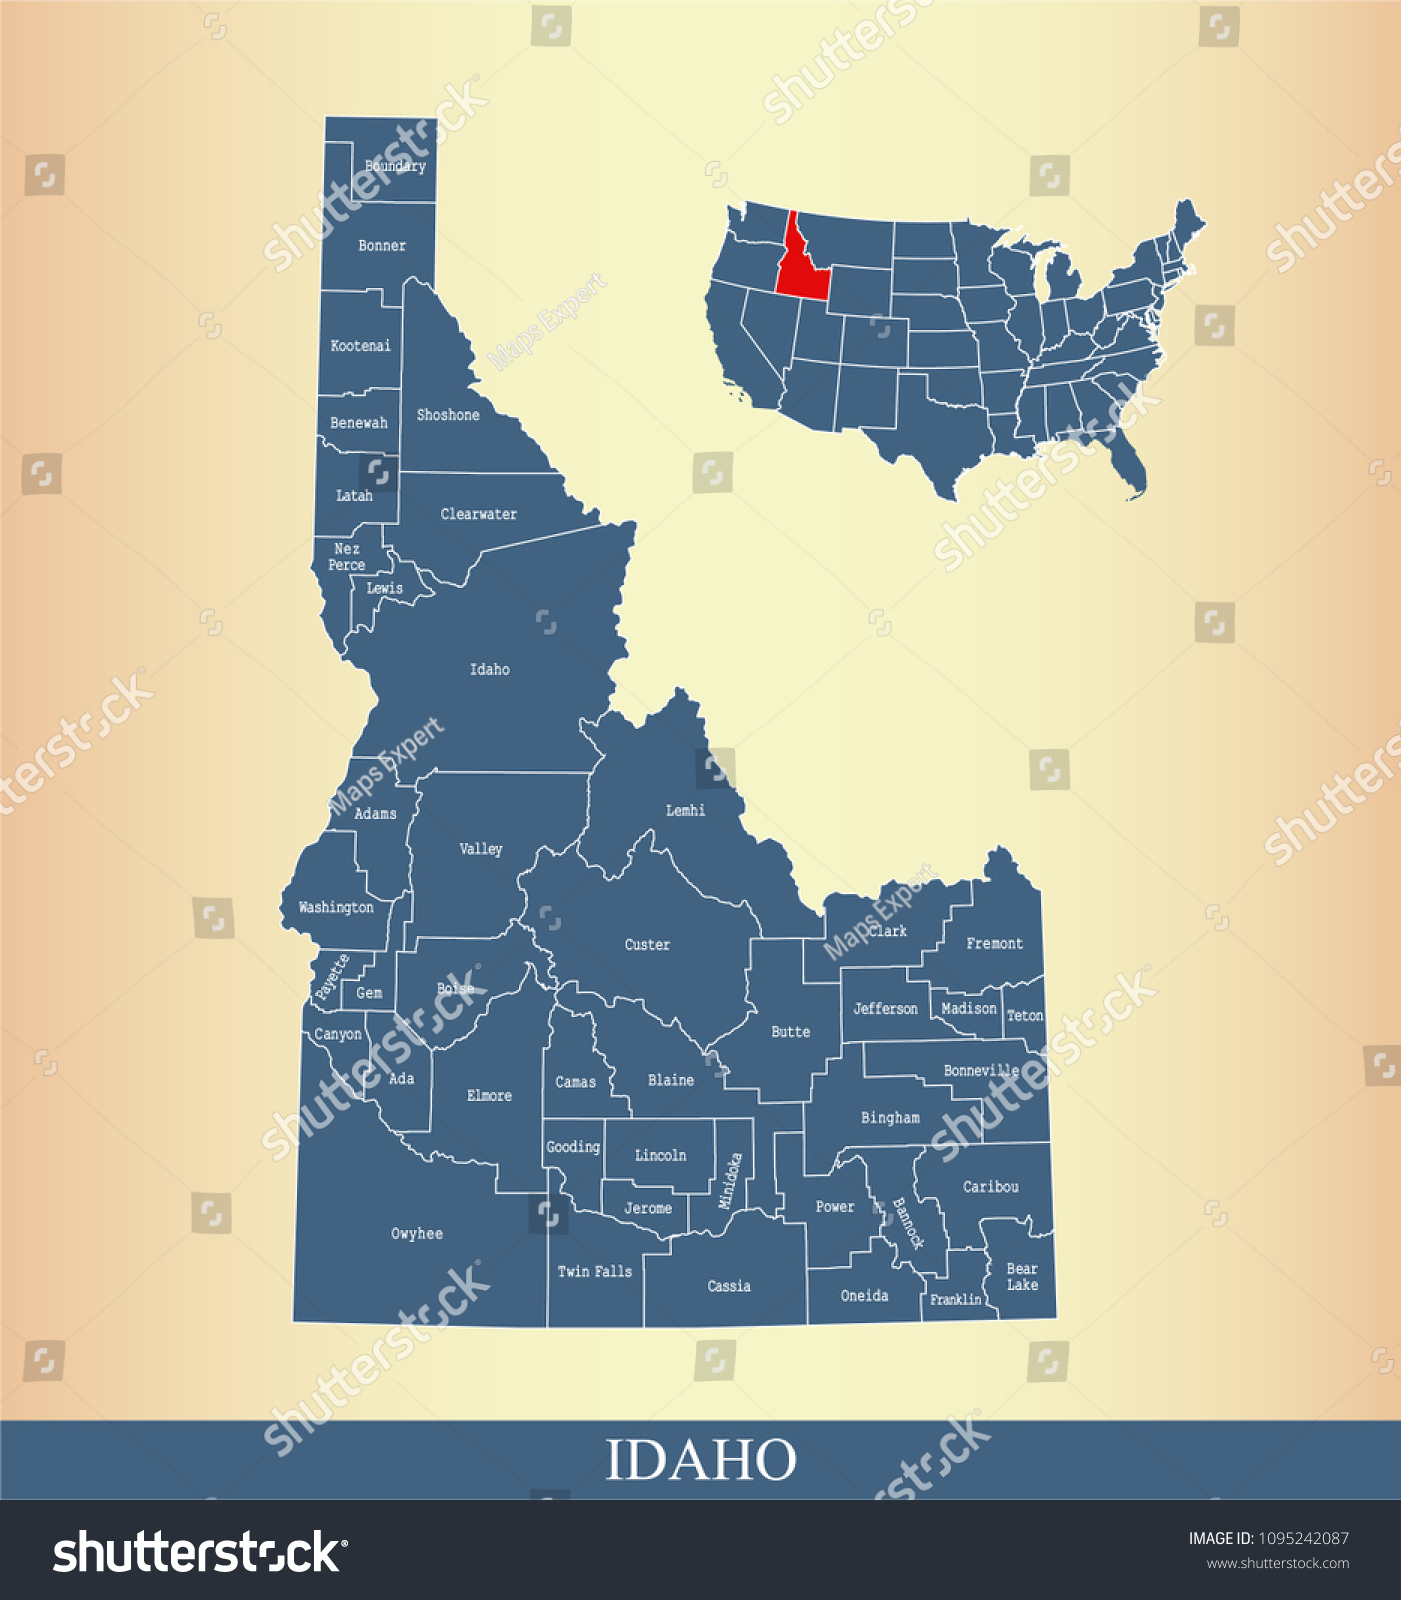 Idaho county map with names labeled. Idaho state of USA map vector outline  #1095242087